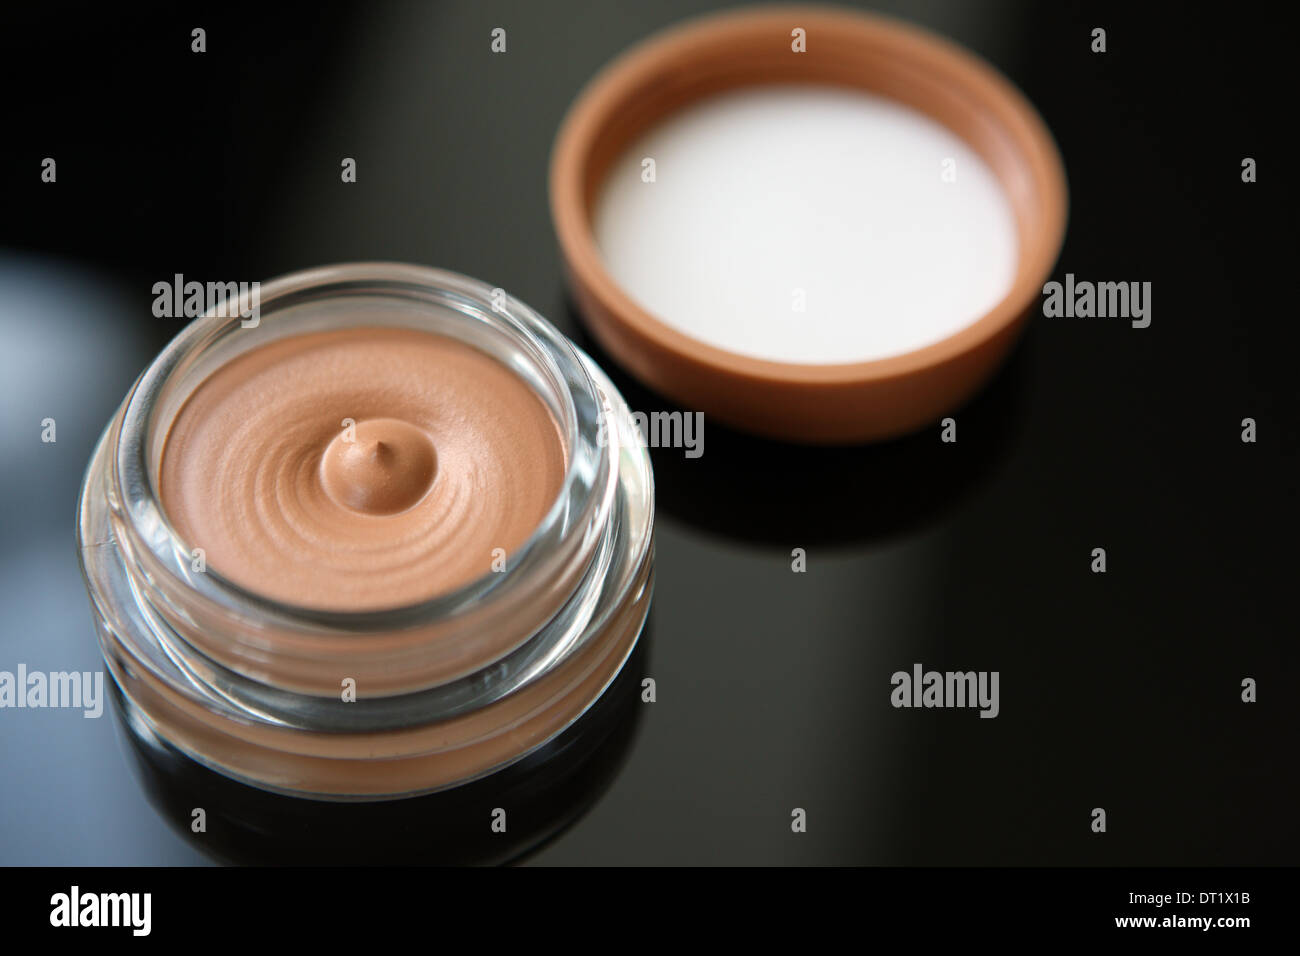 Foundation make-up in a glass jar Stock Photo